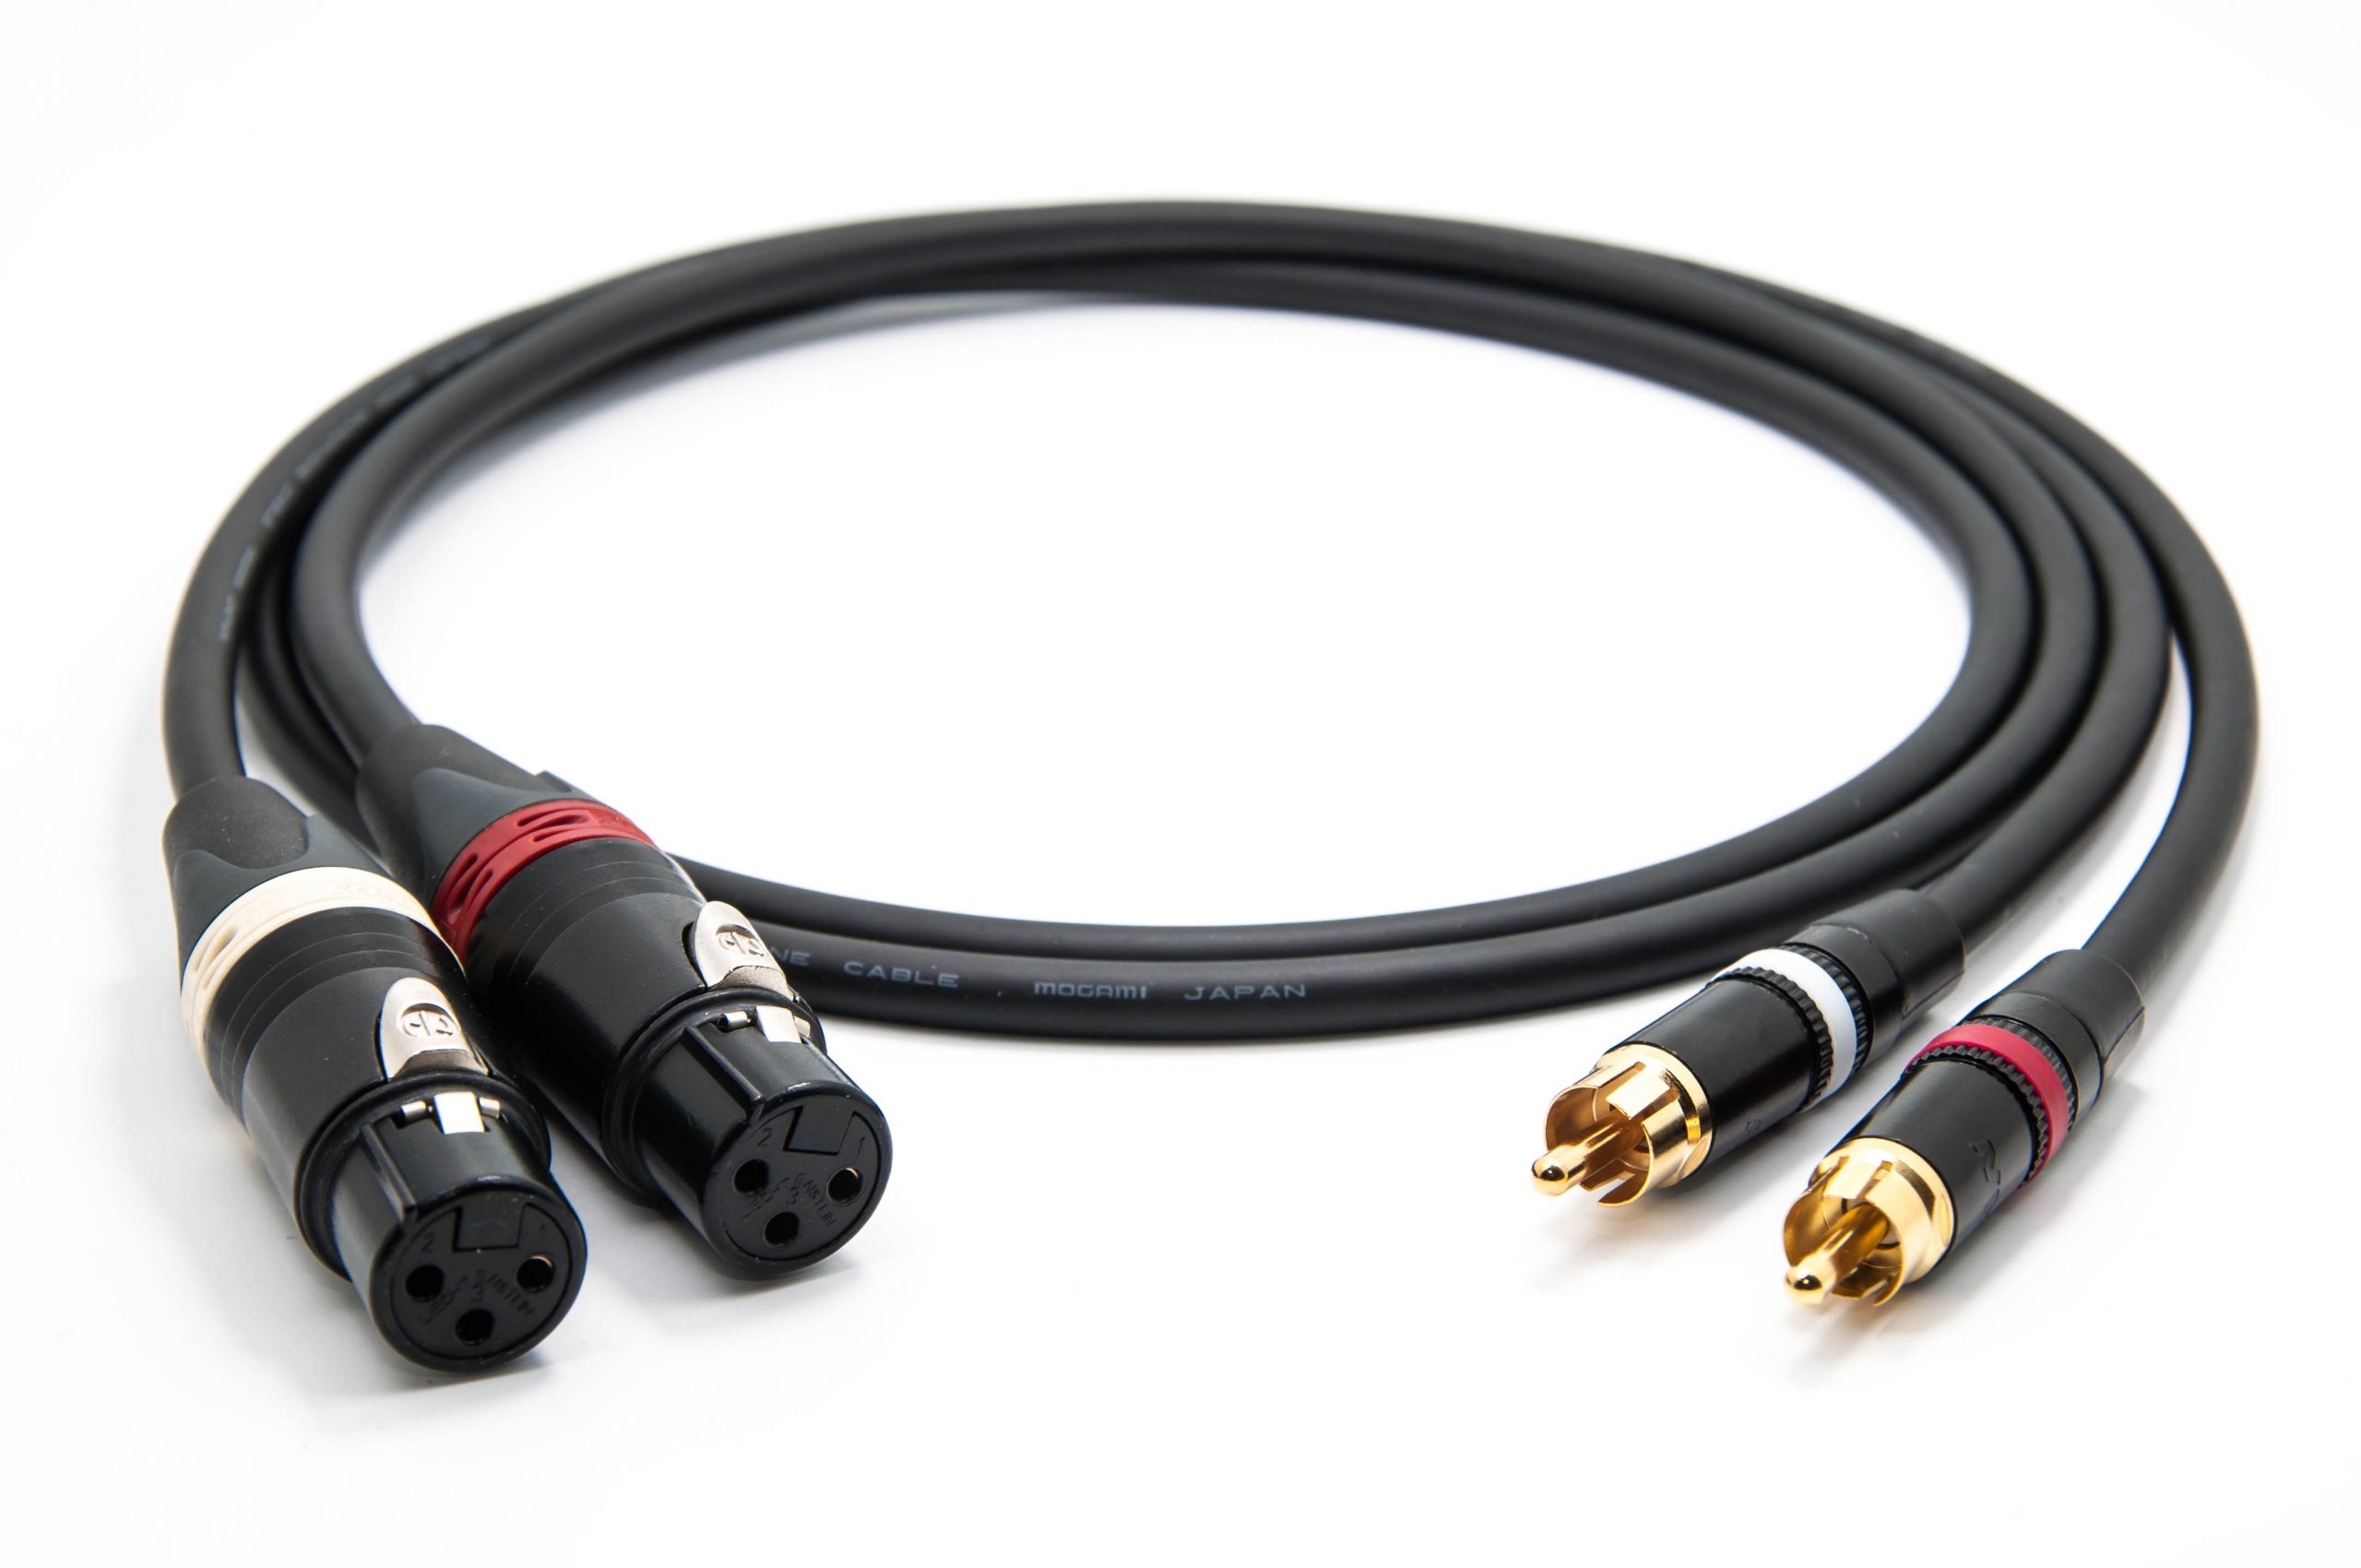 2 Foot Directional Quad High-Definition Audio Interconnect Cable Pair CUSTOM MADE By WORLDS BEST CABLES using Mogami 2534 wire and Neutrik-Rean NYS Gold RCA Connectors